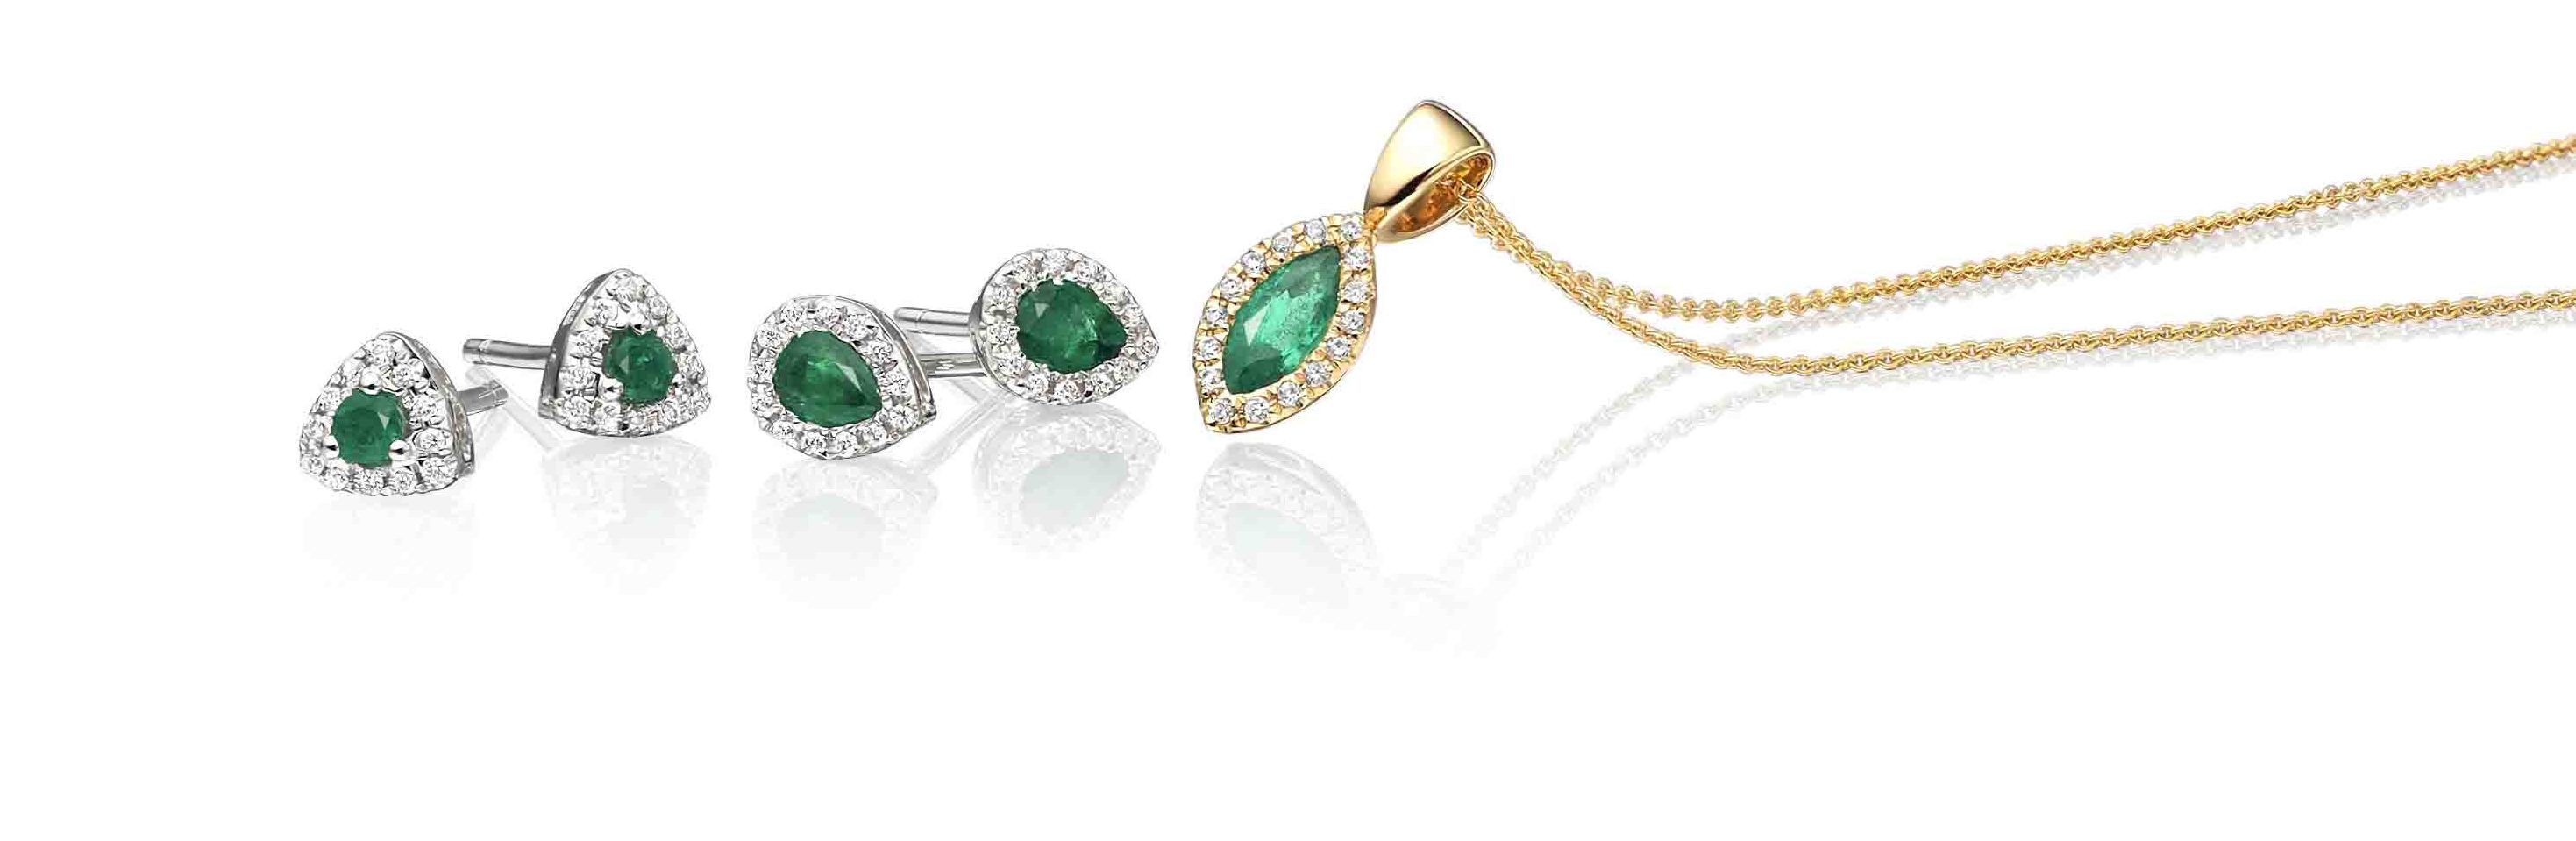 Emerald necklace and emerald earrings set on gold